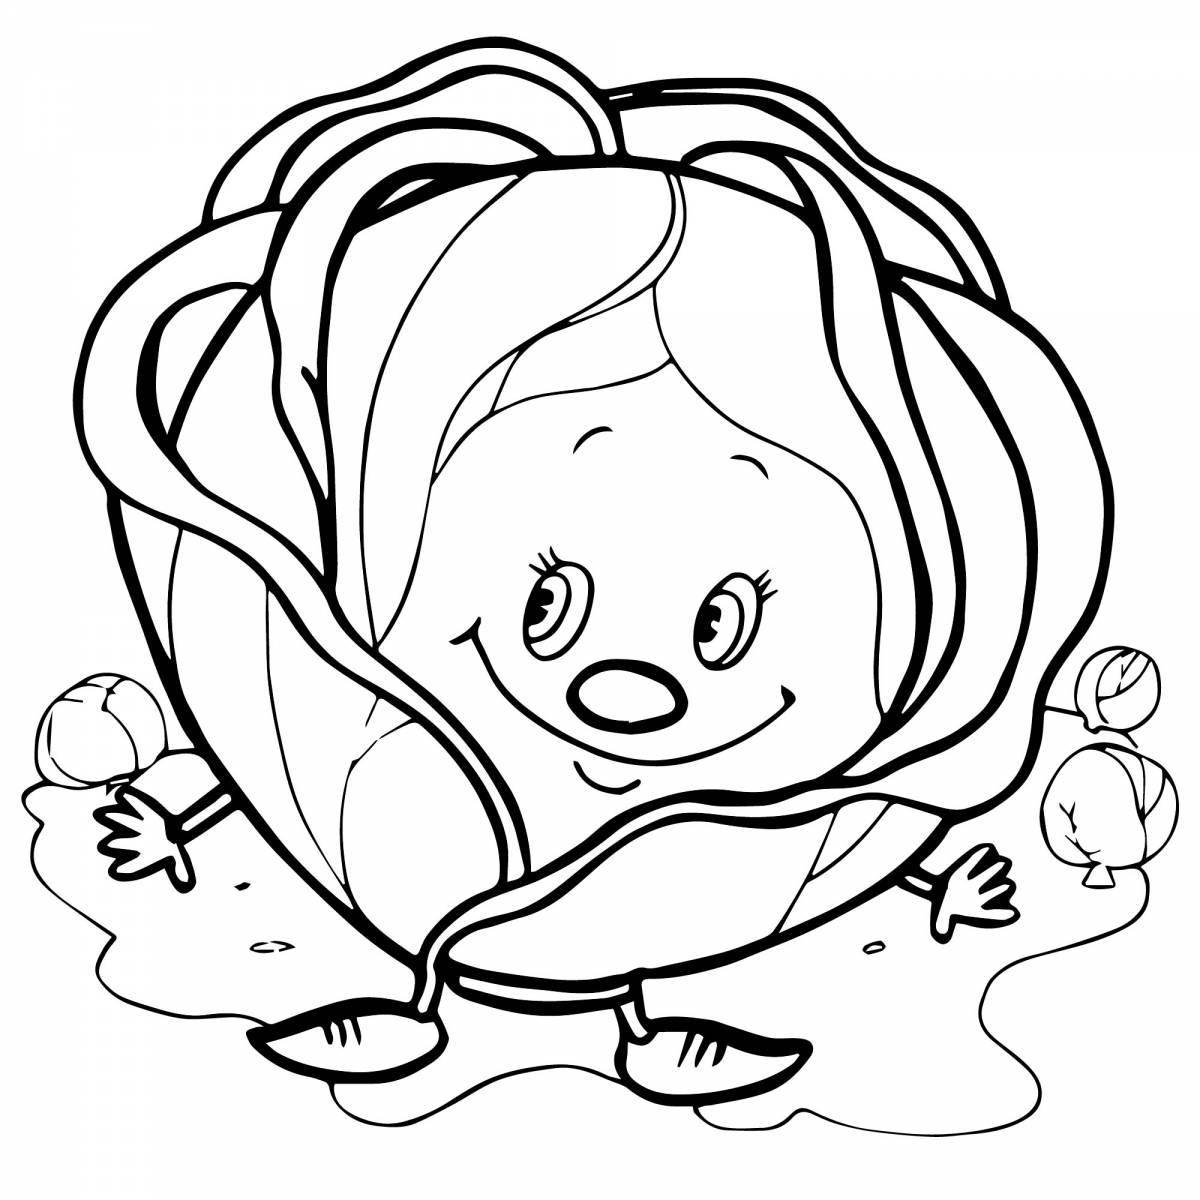 Creative cabbage coloring book for 3-4 year olds